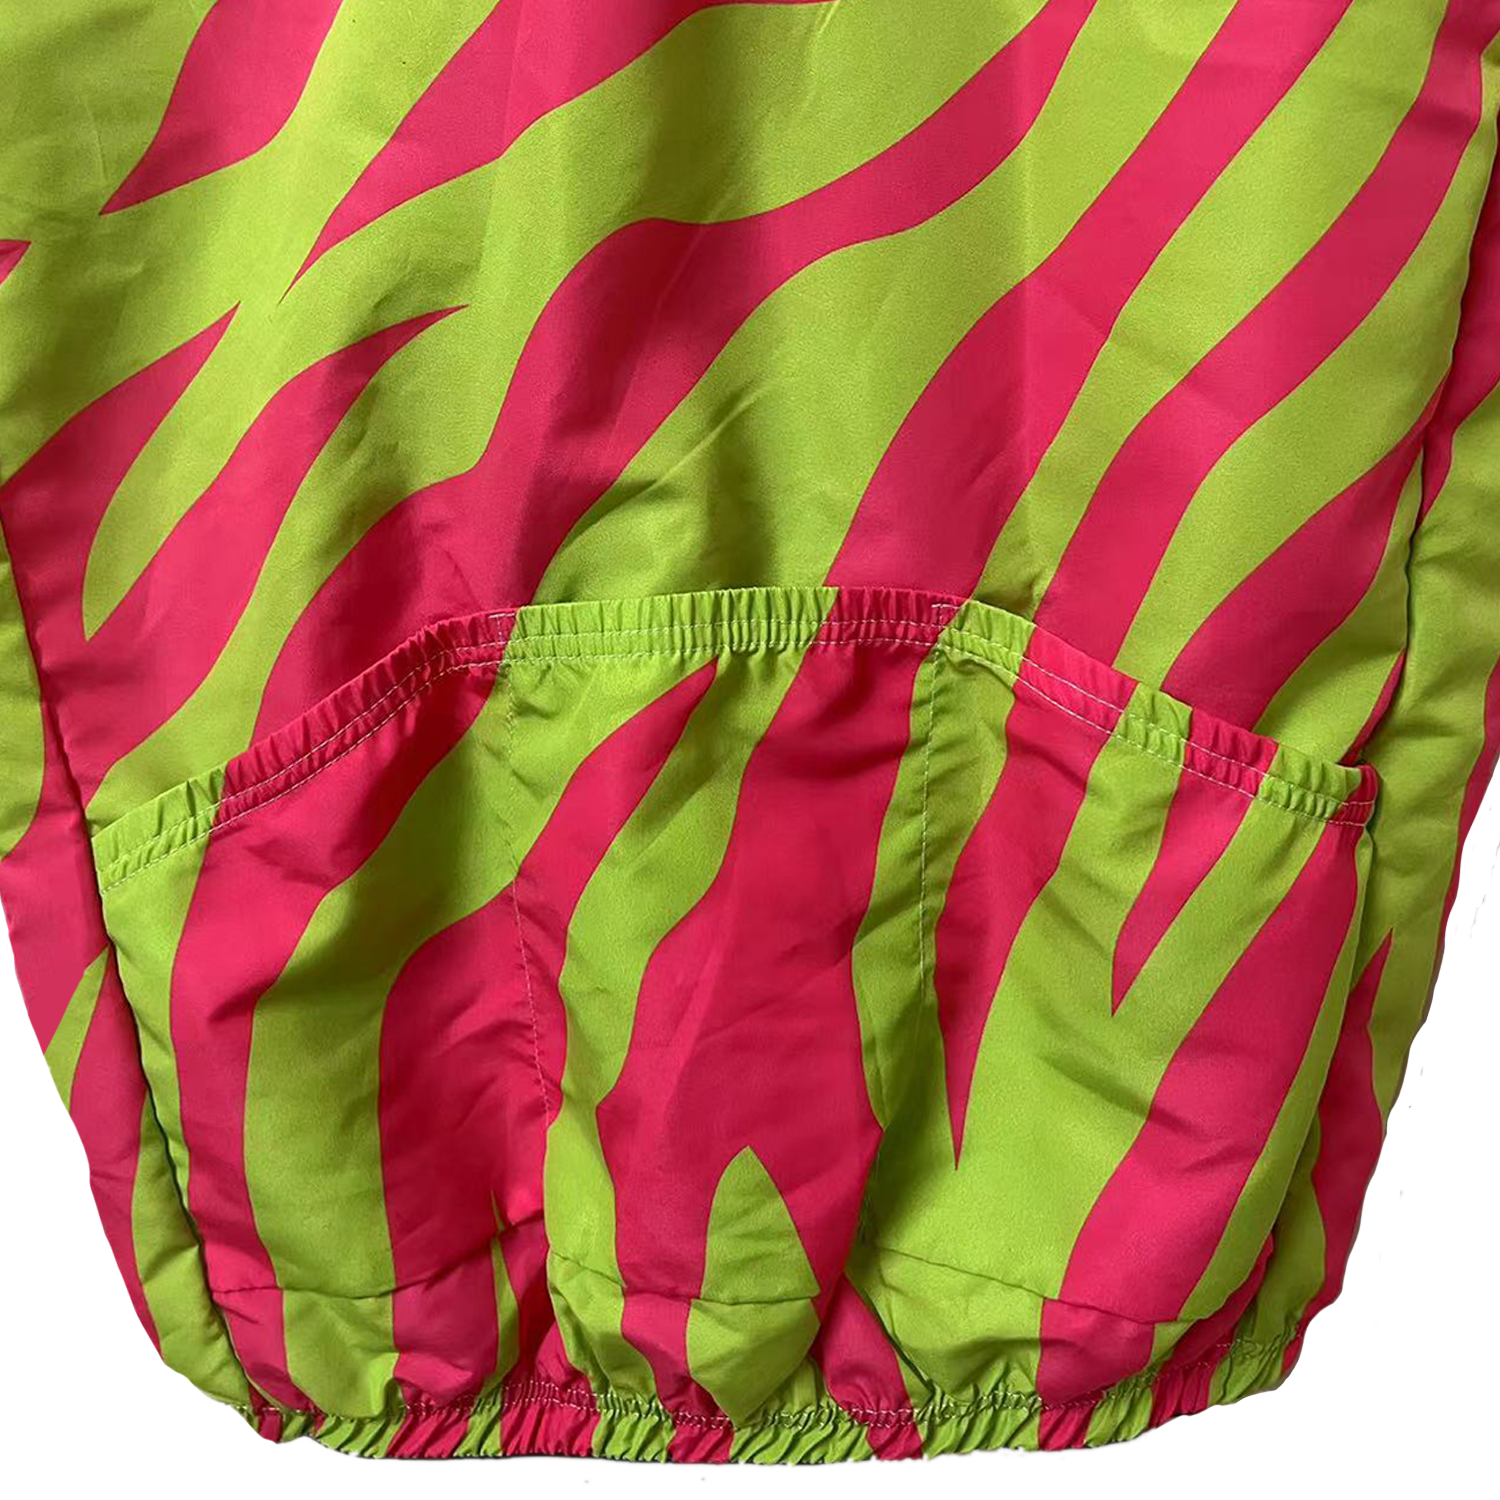 DV Tiger Stripes Pink Lightweight Windproof Water Resistant Cycling Vest